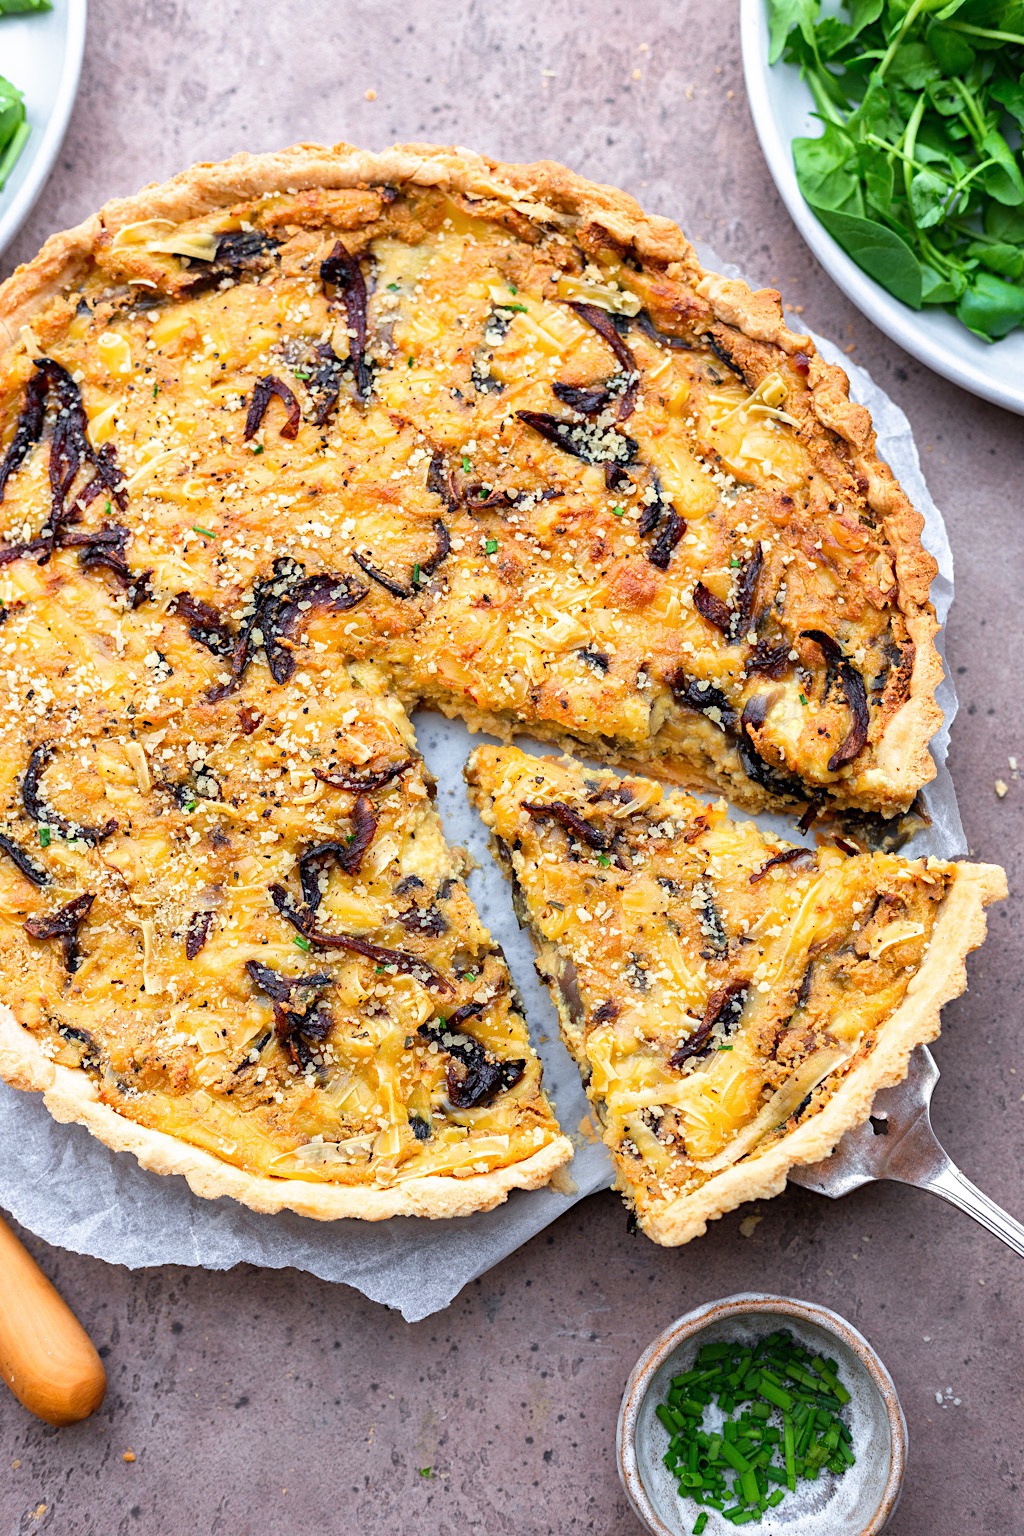 Vegan Caramelised Onion and Cheddar Cheese Quiche #vegan #quiche #onion #cheese #summer #picnic